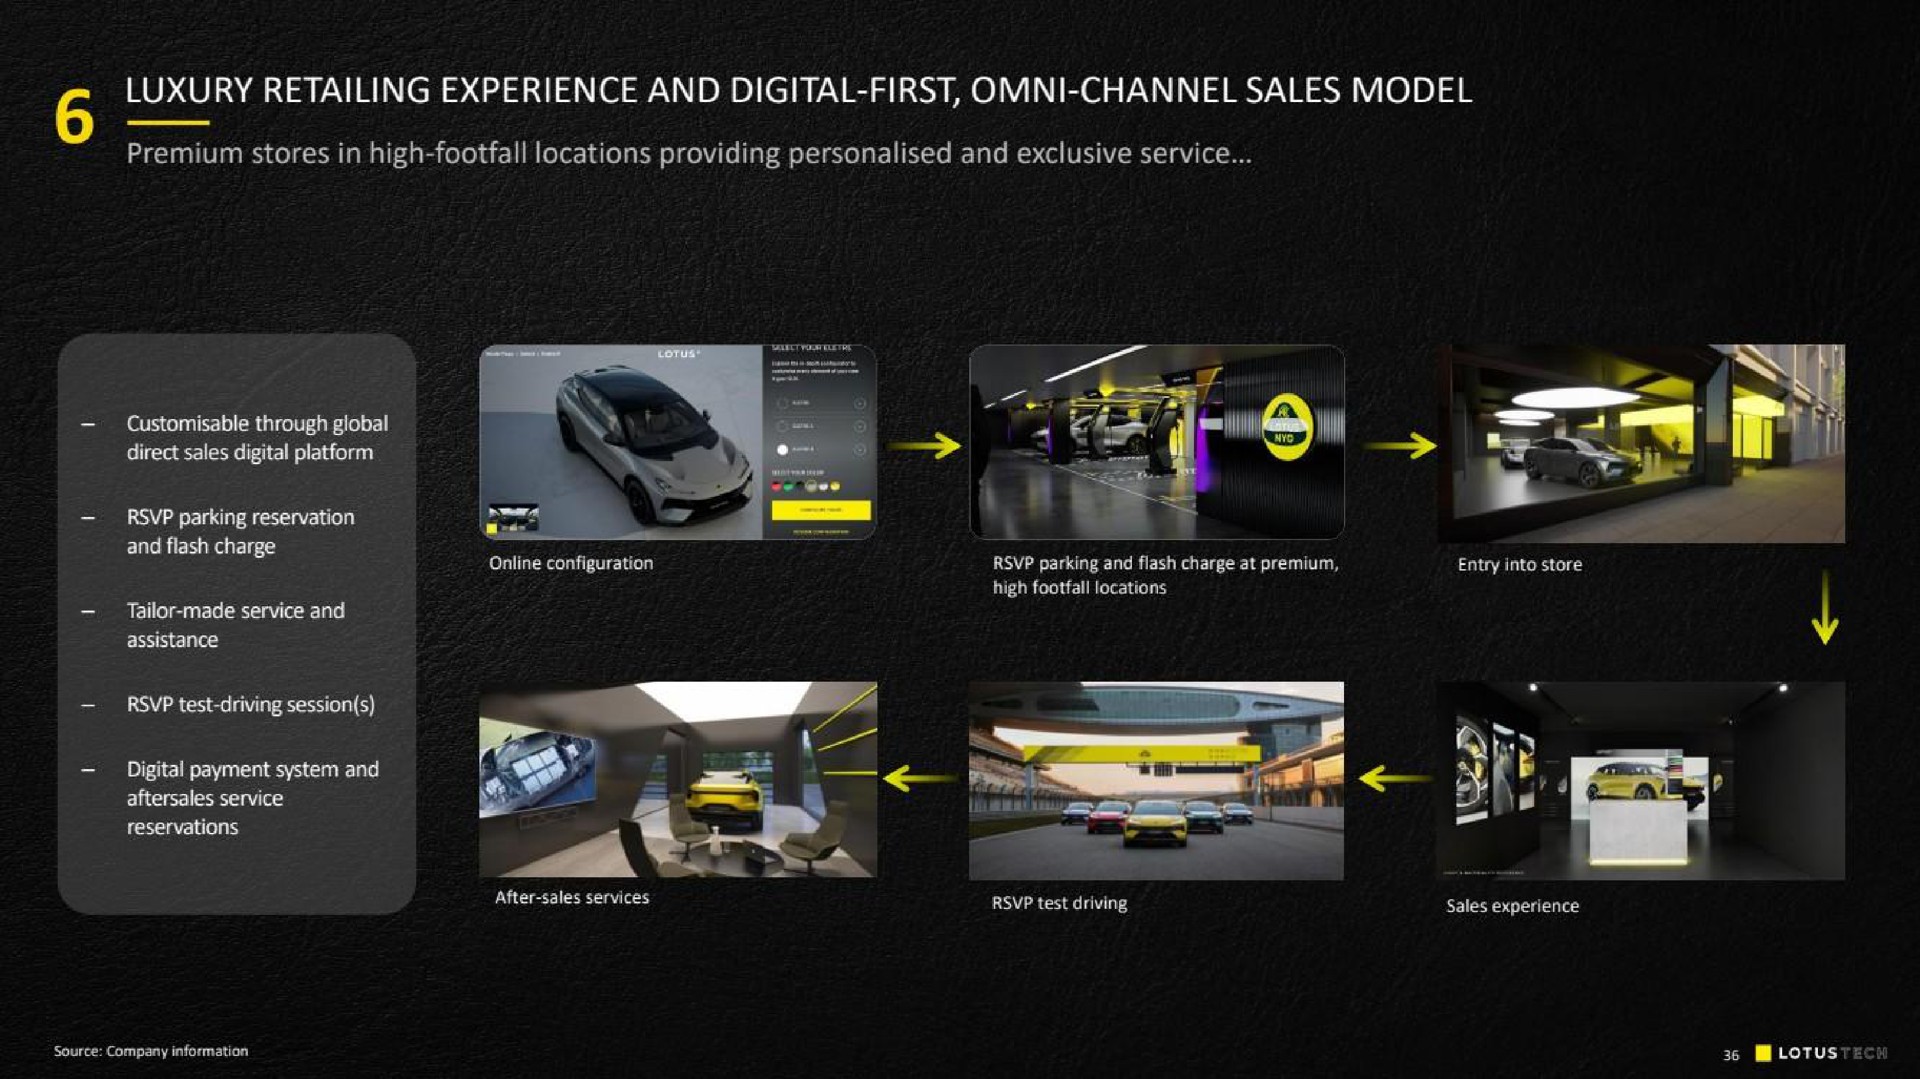 luxury retailing experience and digital first channel sales model | Lotus Cars